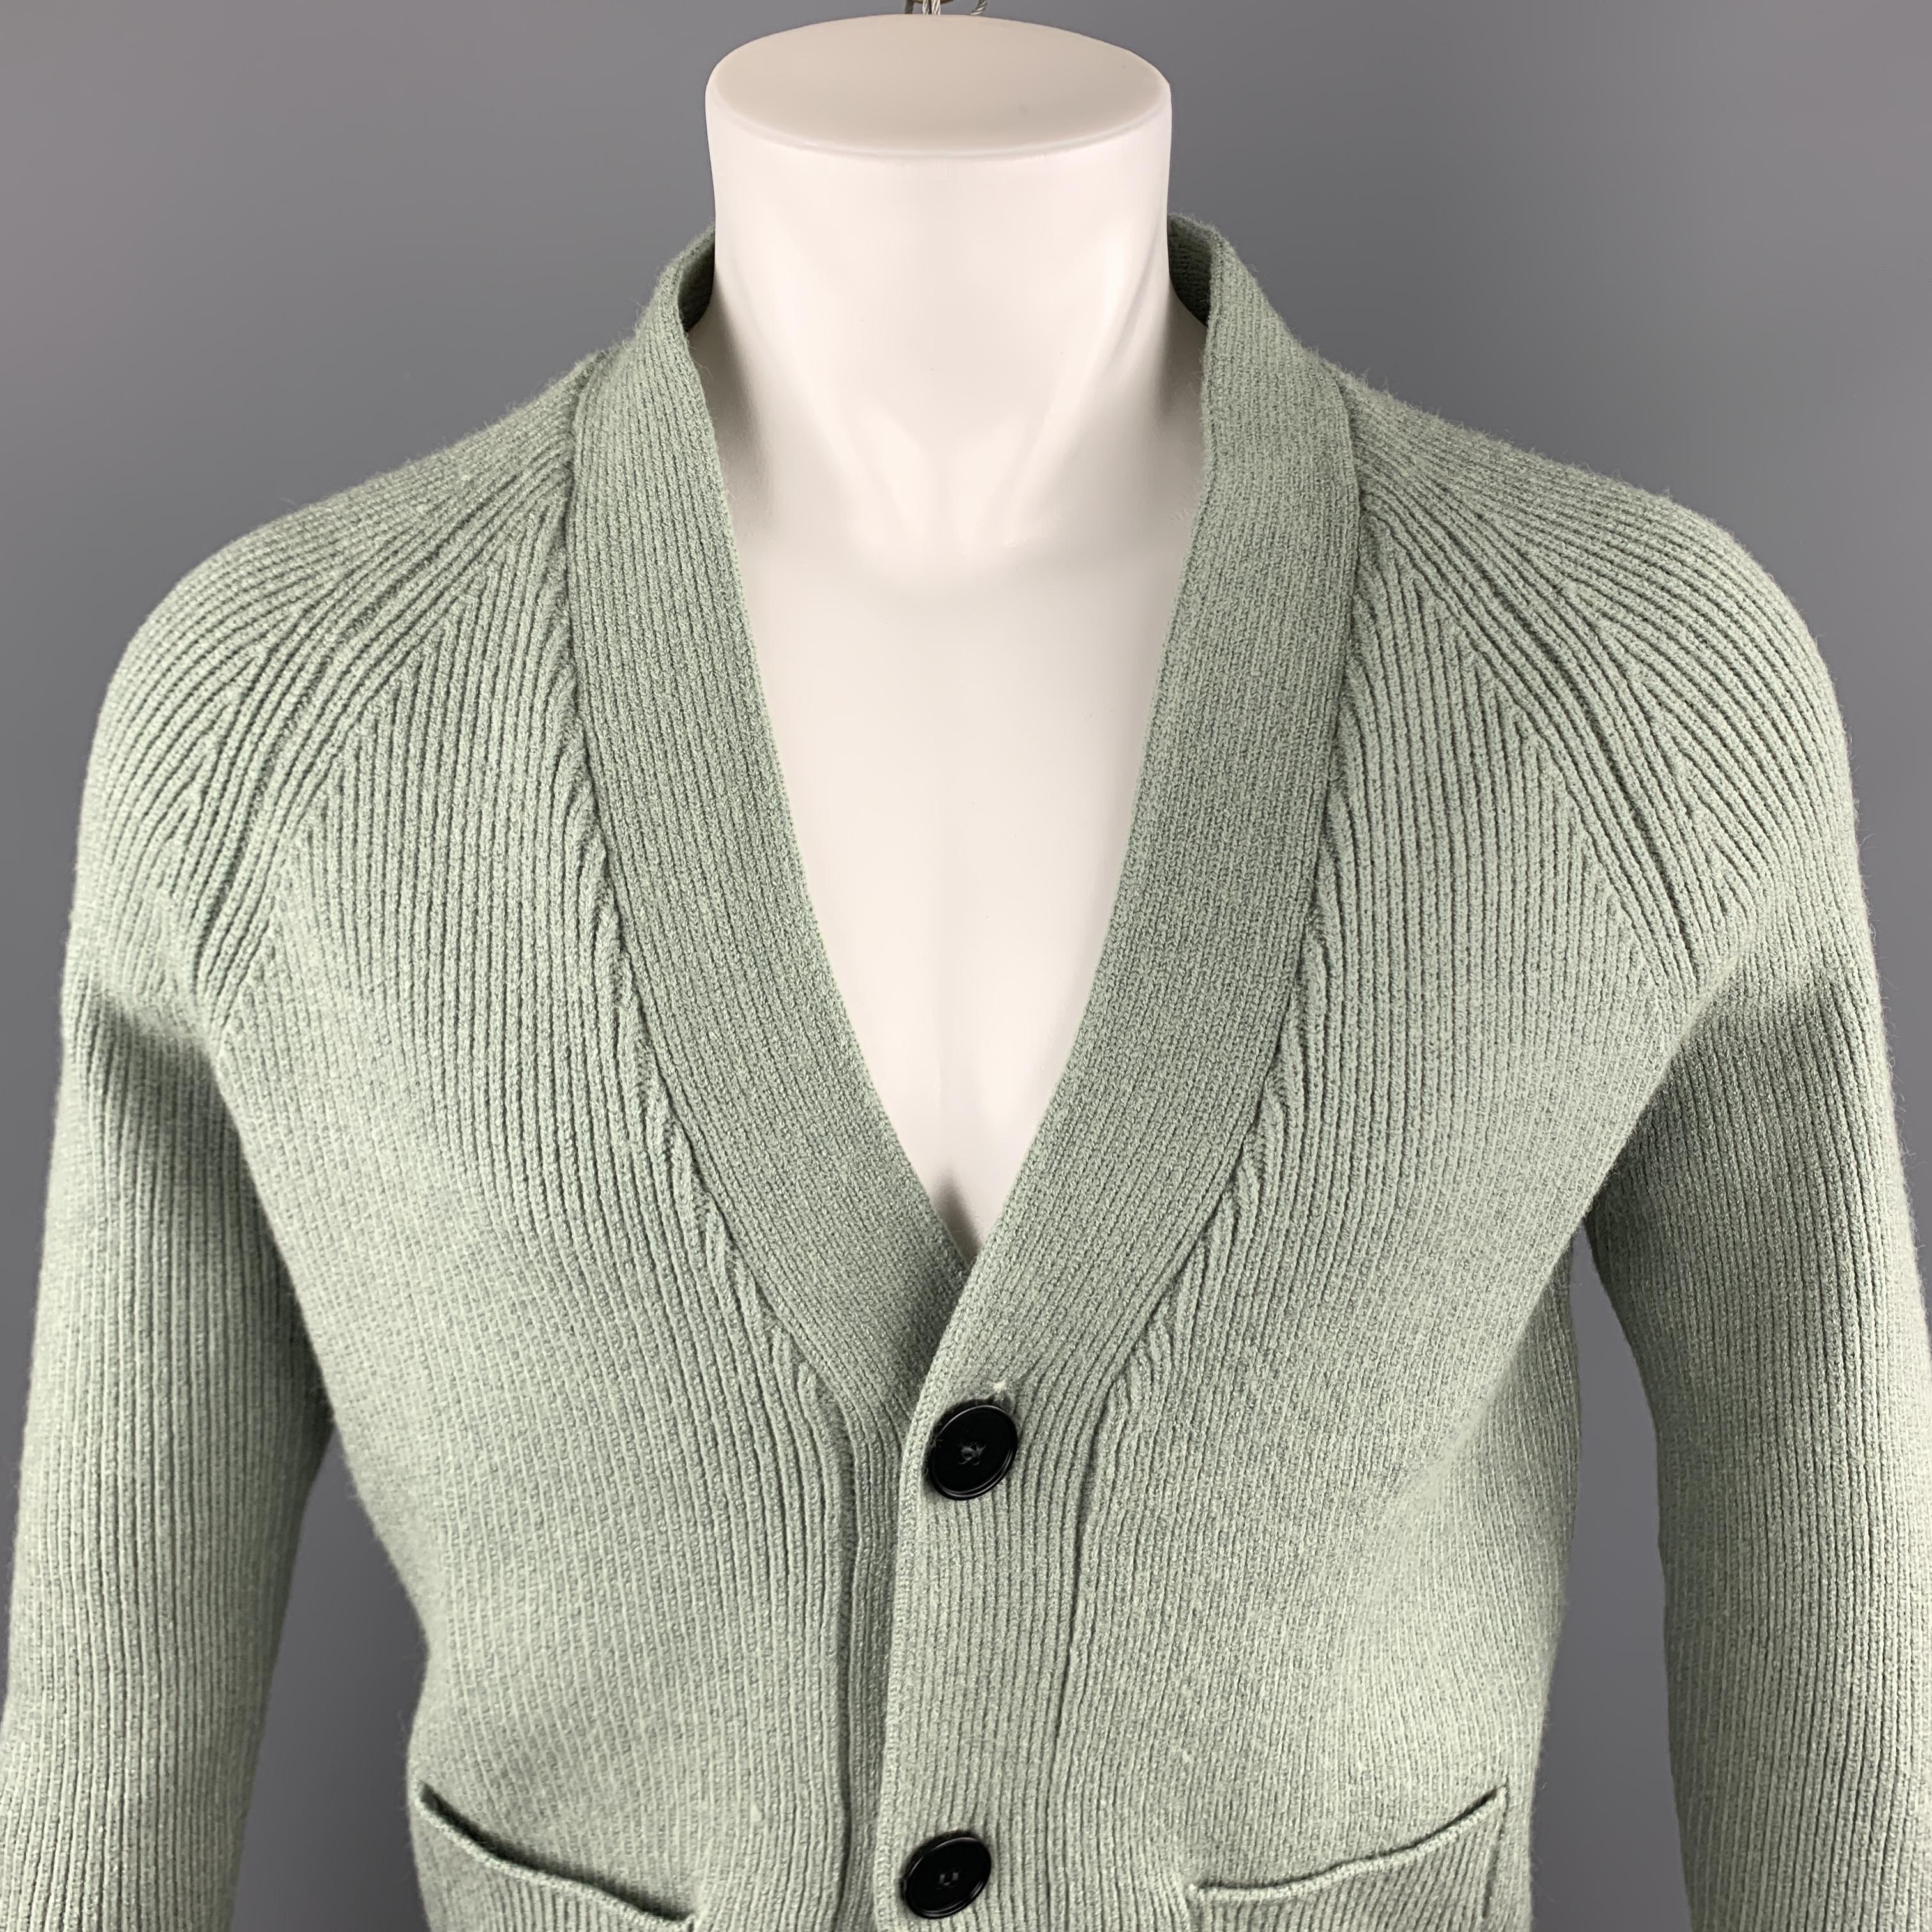 KITON cardigan sweater comes in a solid green knitted cashmere / silk material, with a V-neck, raglan sleeves, two buttons at closure, and ribbed cuffs and hem. Made in Italy. 

New With Tags.
Marked: IT 52 / US L

Measurements:

Shoulder: 17 in.